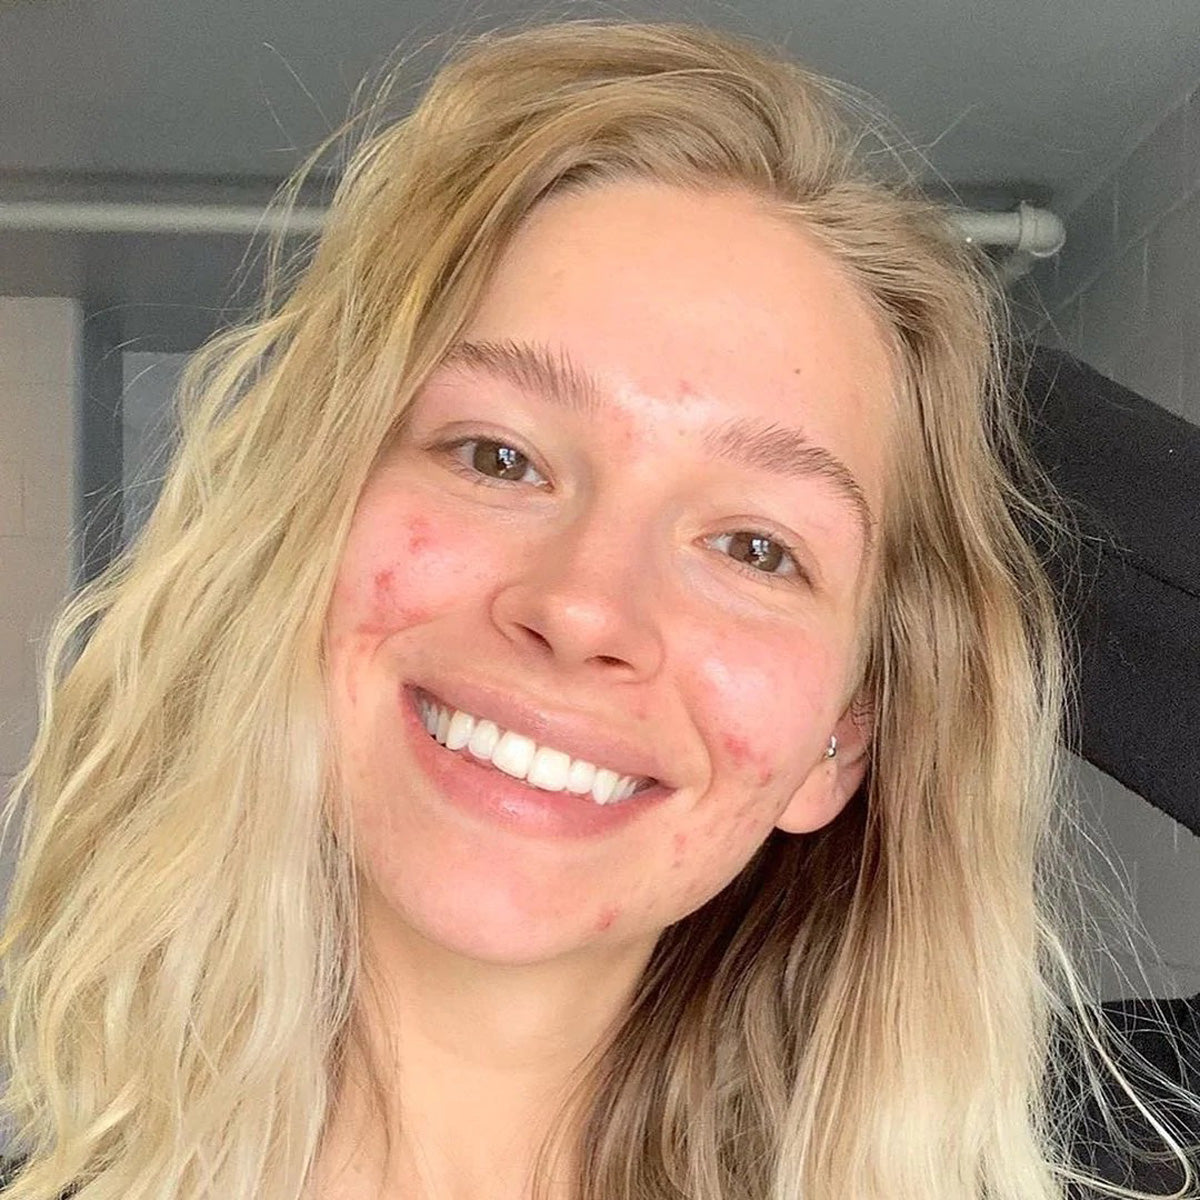 A blonde smiling girl with some acne